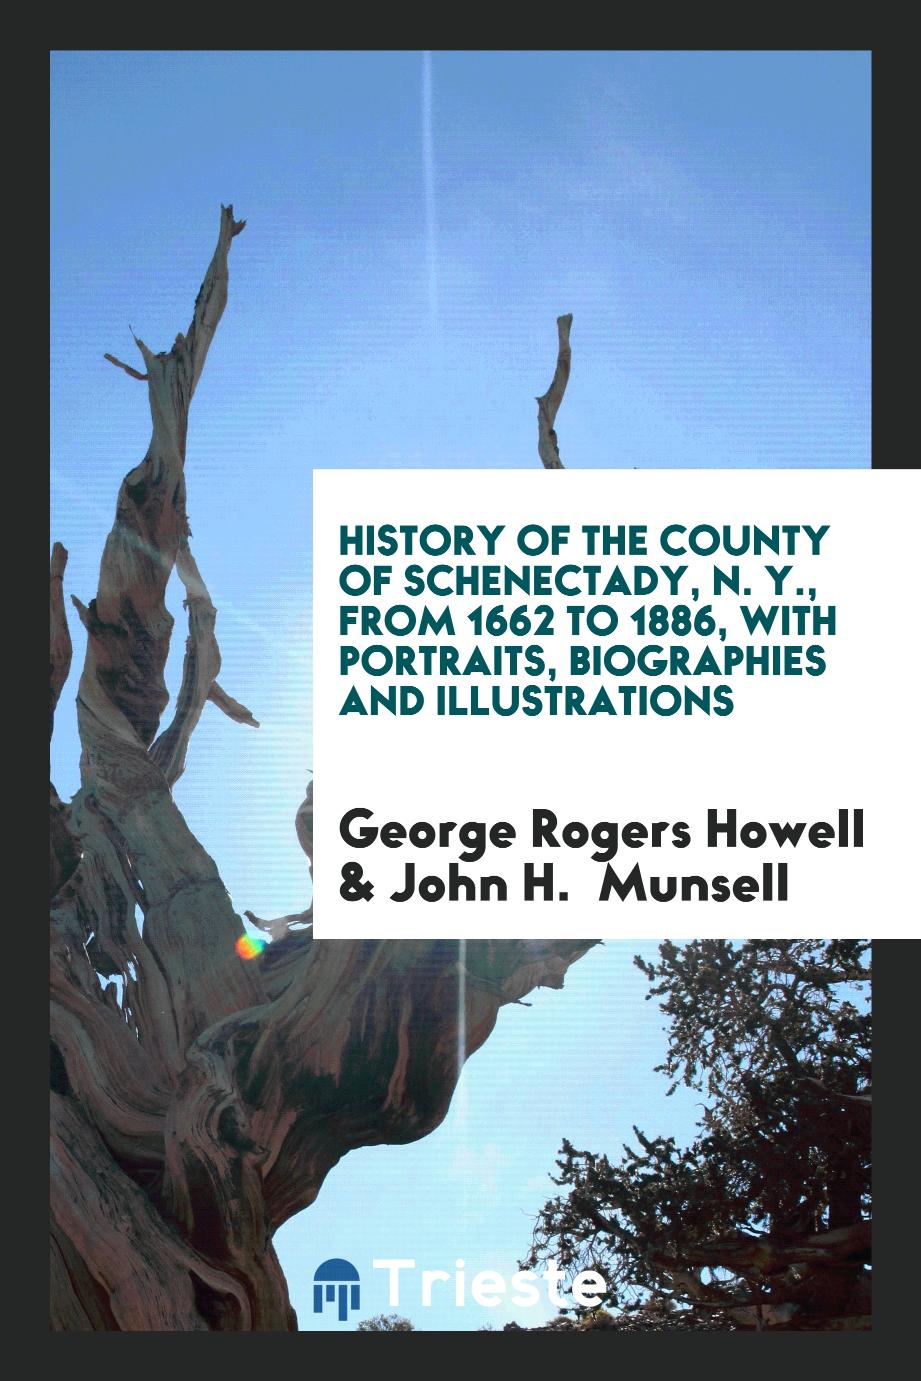 History of the County of Schenectady, N. Y., from 1662 to 1886, with Portraits, Biographies and Illustrations